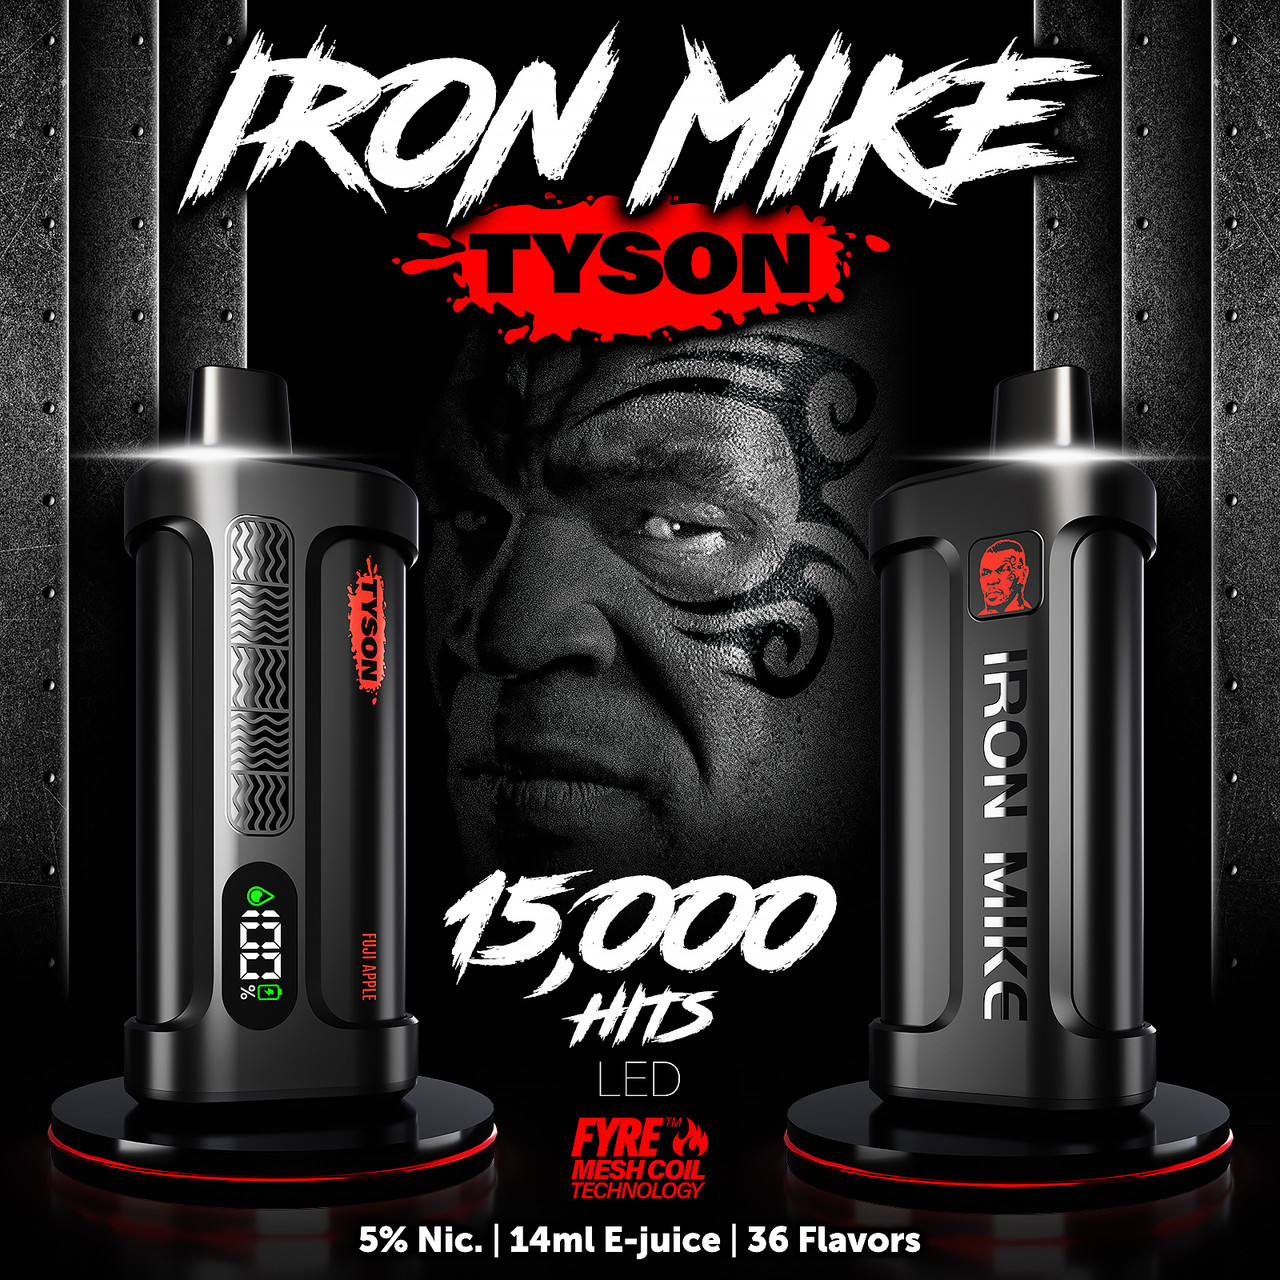 Watermelon – Iron Mike Tyson 15000 Puffs | All Flavors Available